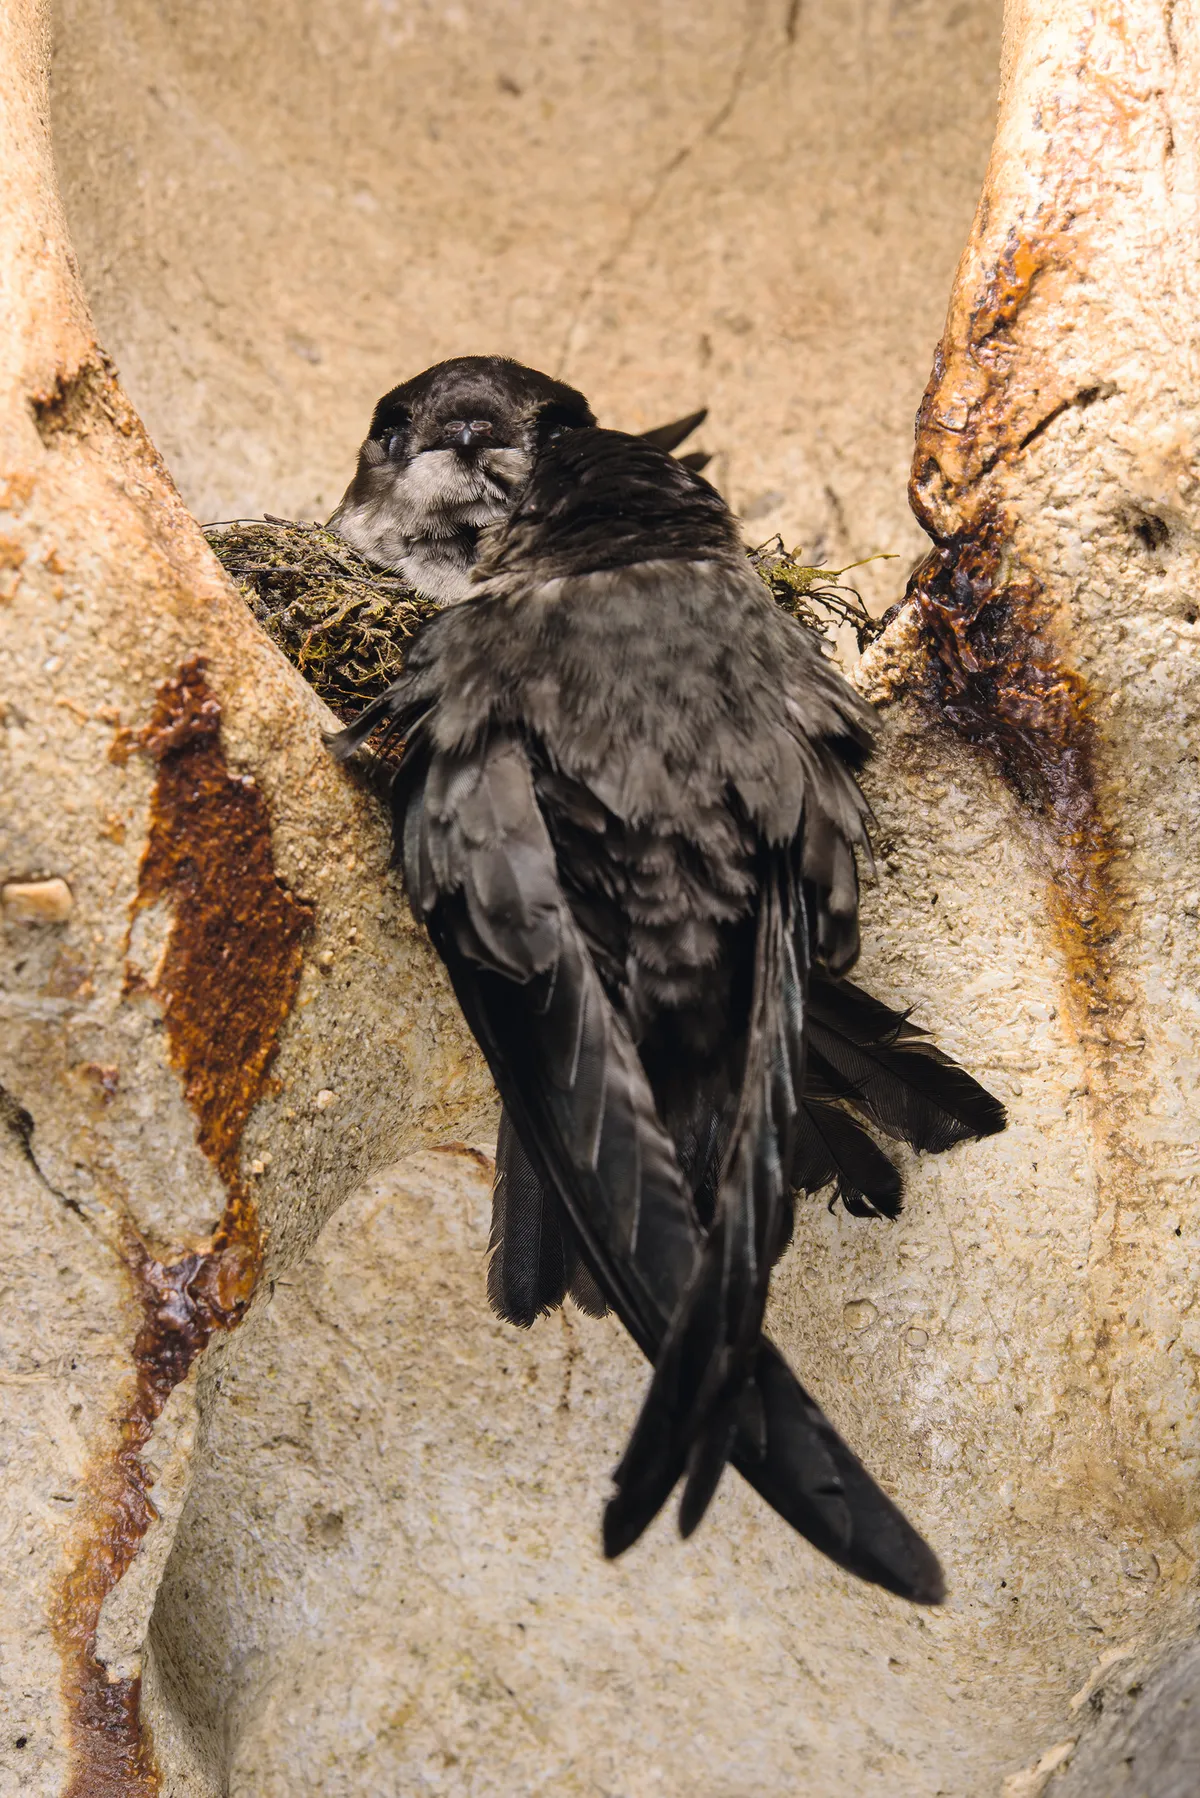 Unlike most other birds, swiftlets can echolocate, which is invaluable for navigating cave complexes. These black-nest swiftlets in Lang Cave are almost ready to fledge. © Emanuele Biggi and Francesco Tomasinelli.